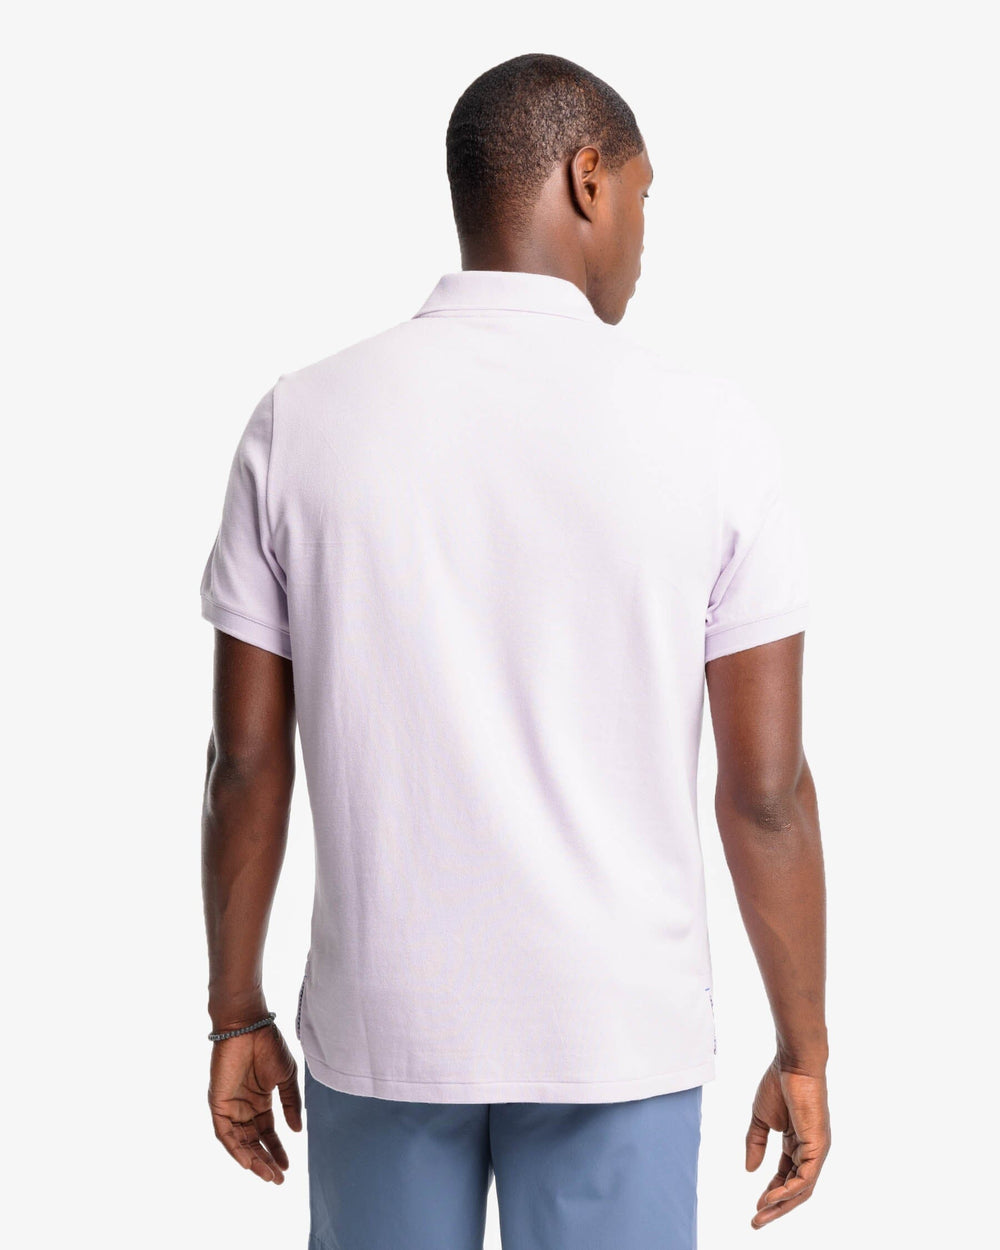 The model back view of the Men's New Skipjack Polo Shirt by Southern Tide - Orchid Petal